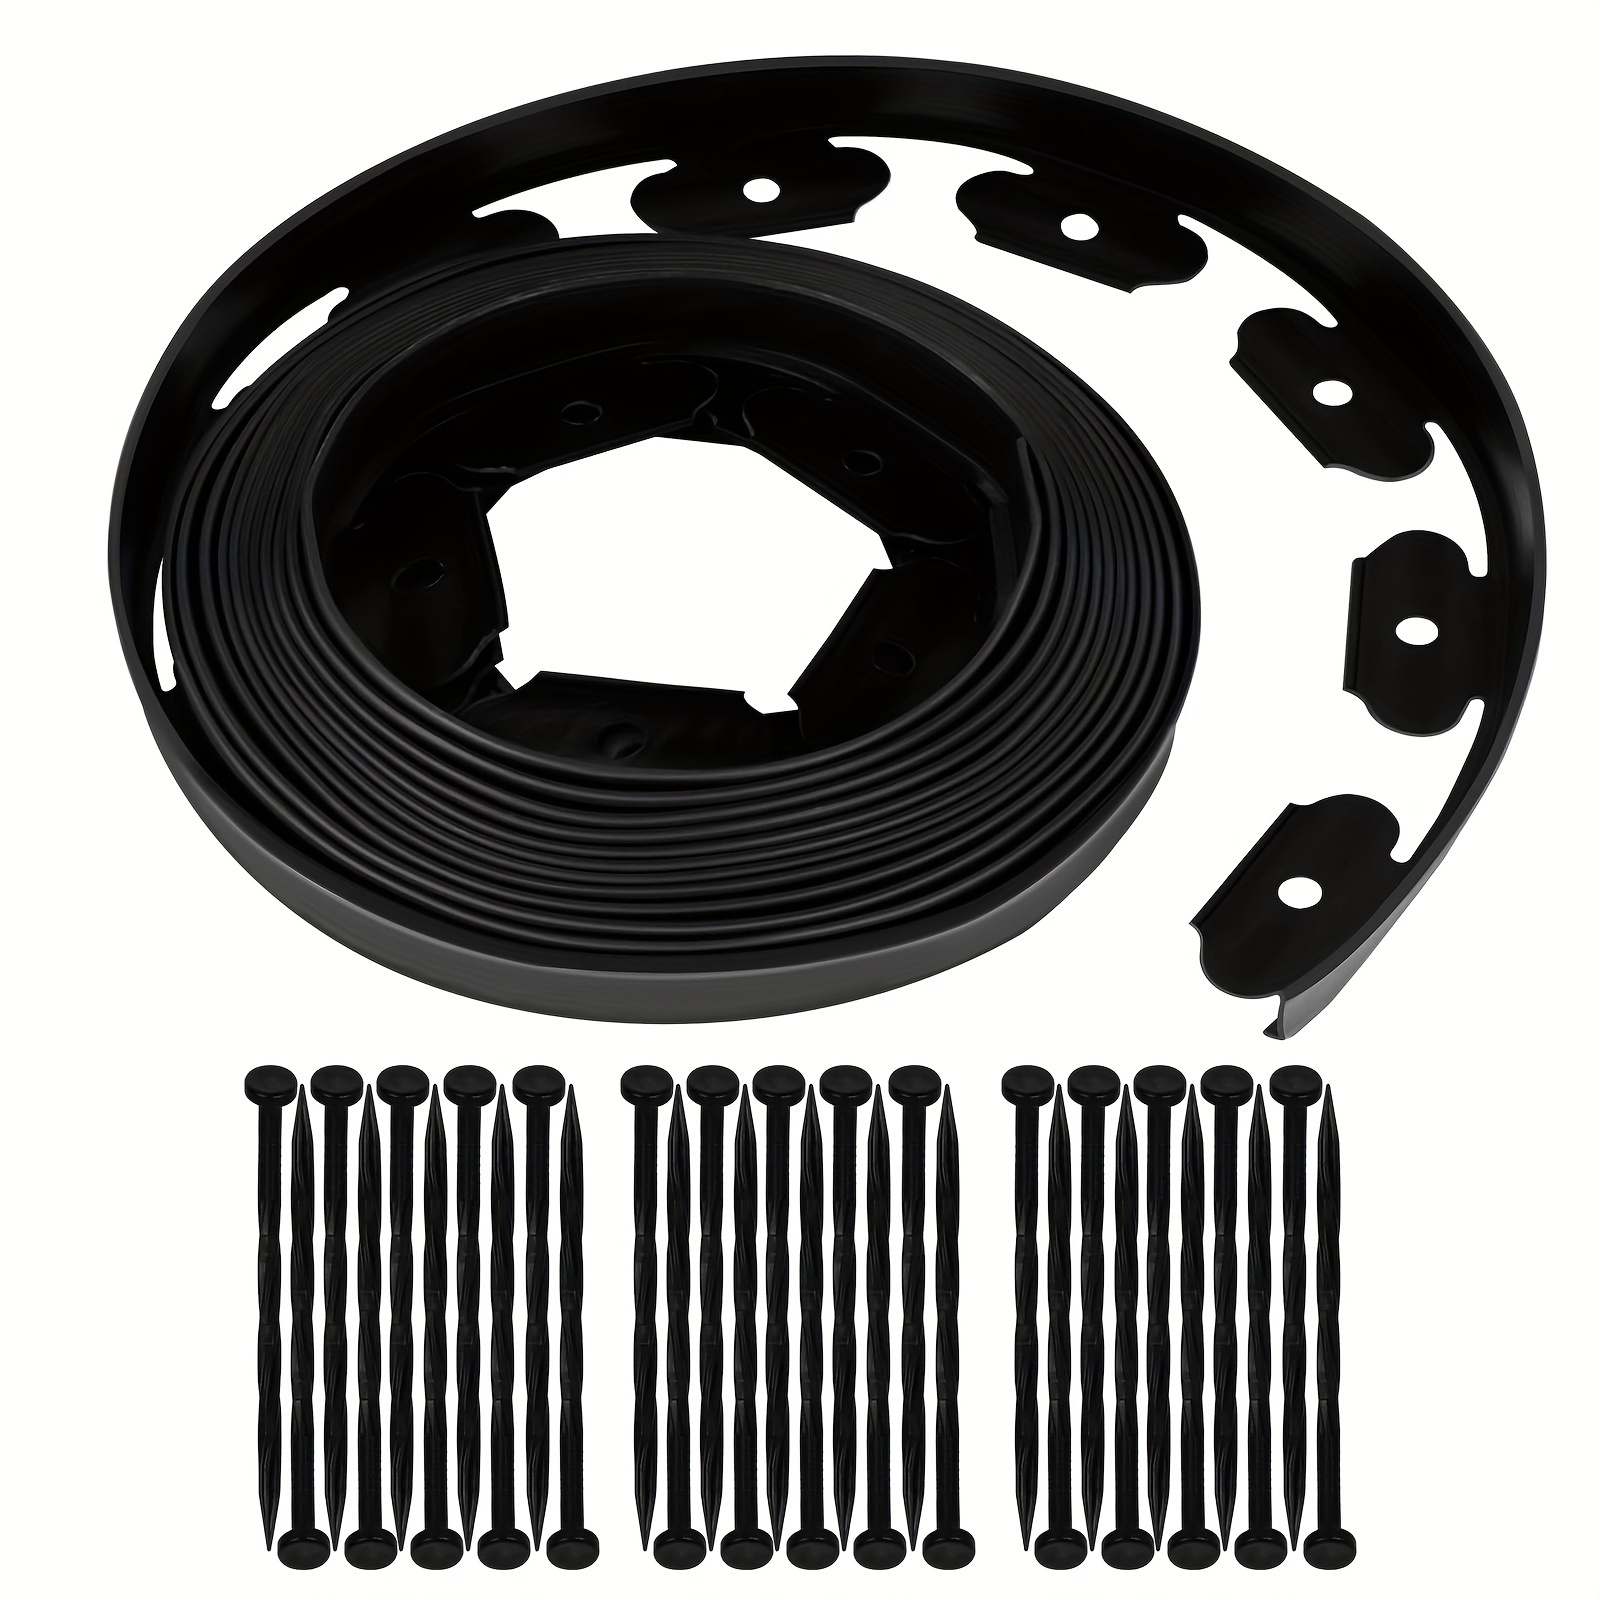 

Easy-install 33ft Black Landscape Edging Kit, 2in High No-dig Plastic Garden Border With 30 Anchoring Spikes